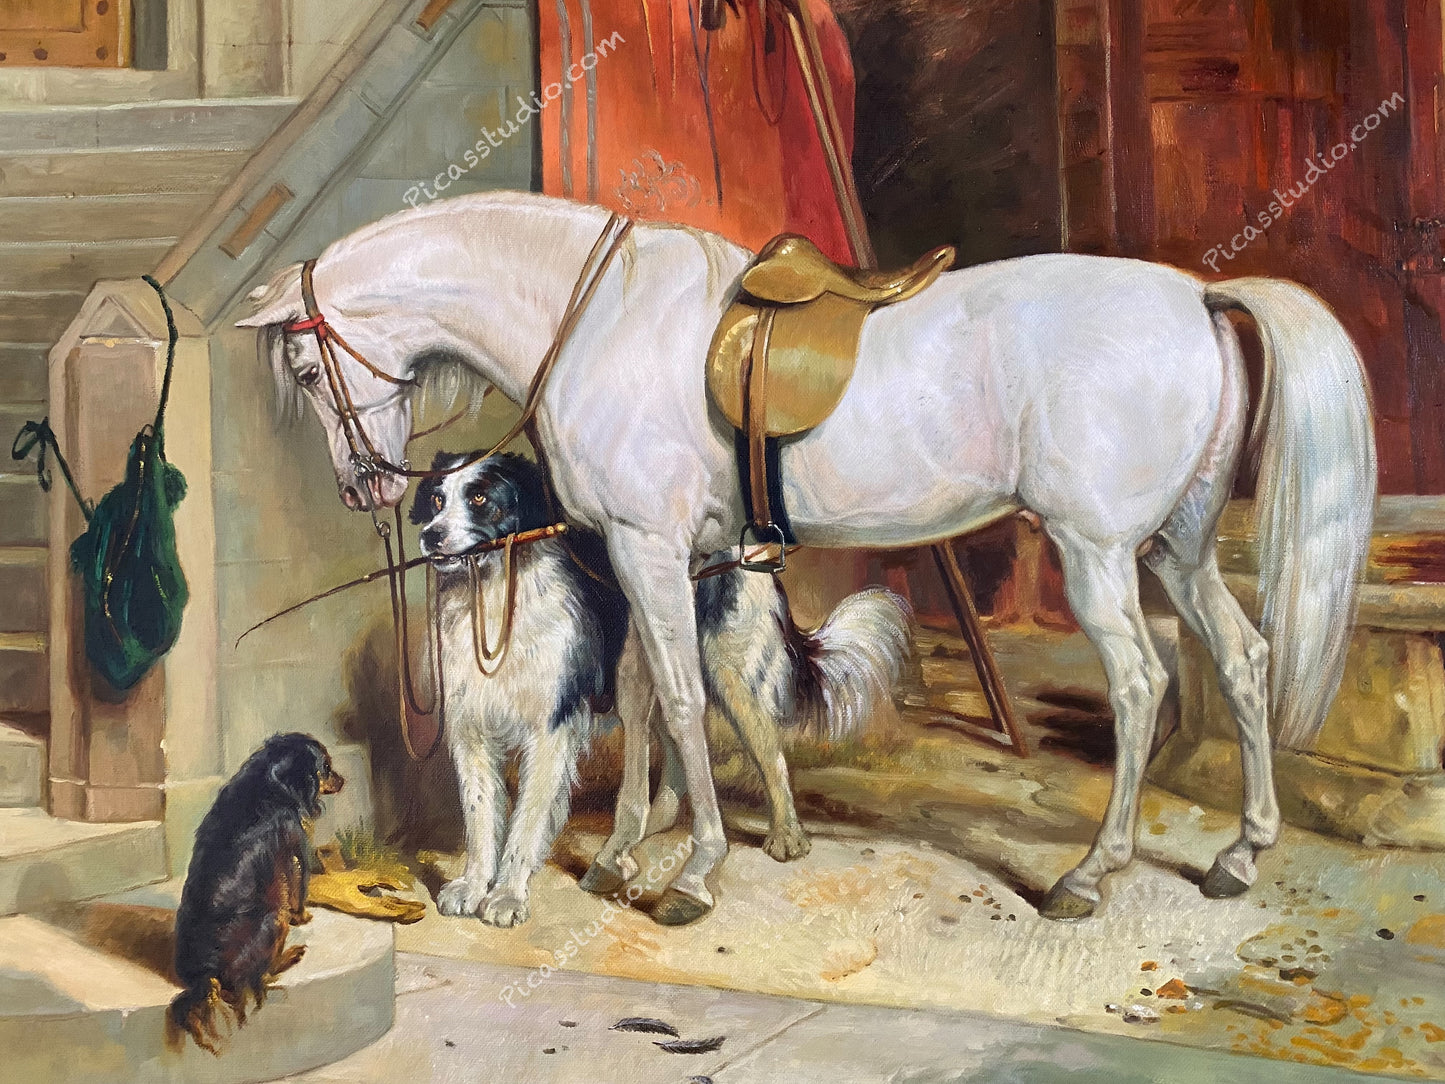 Sir Edwin Henry Landseer - Favourites, the Property of H.R.H. Prince George of Cambridge Oil Painting Hand Painted Art on Canvas Vintage Wall Decor Unframed